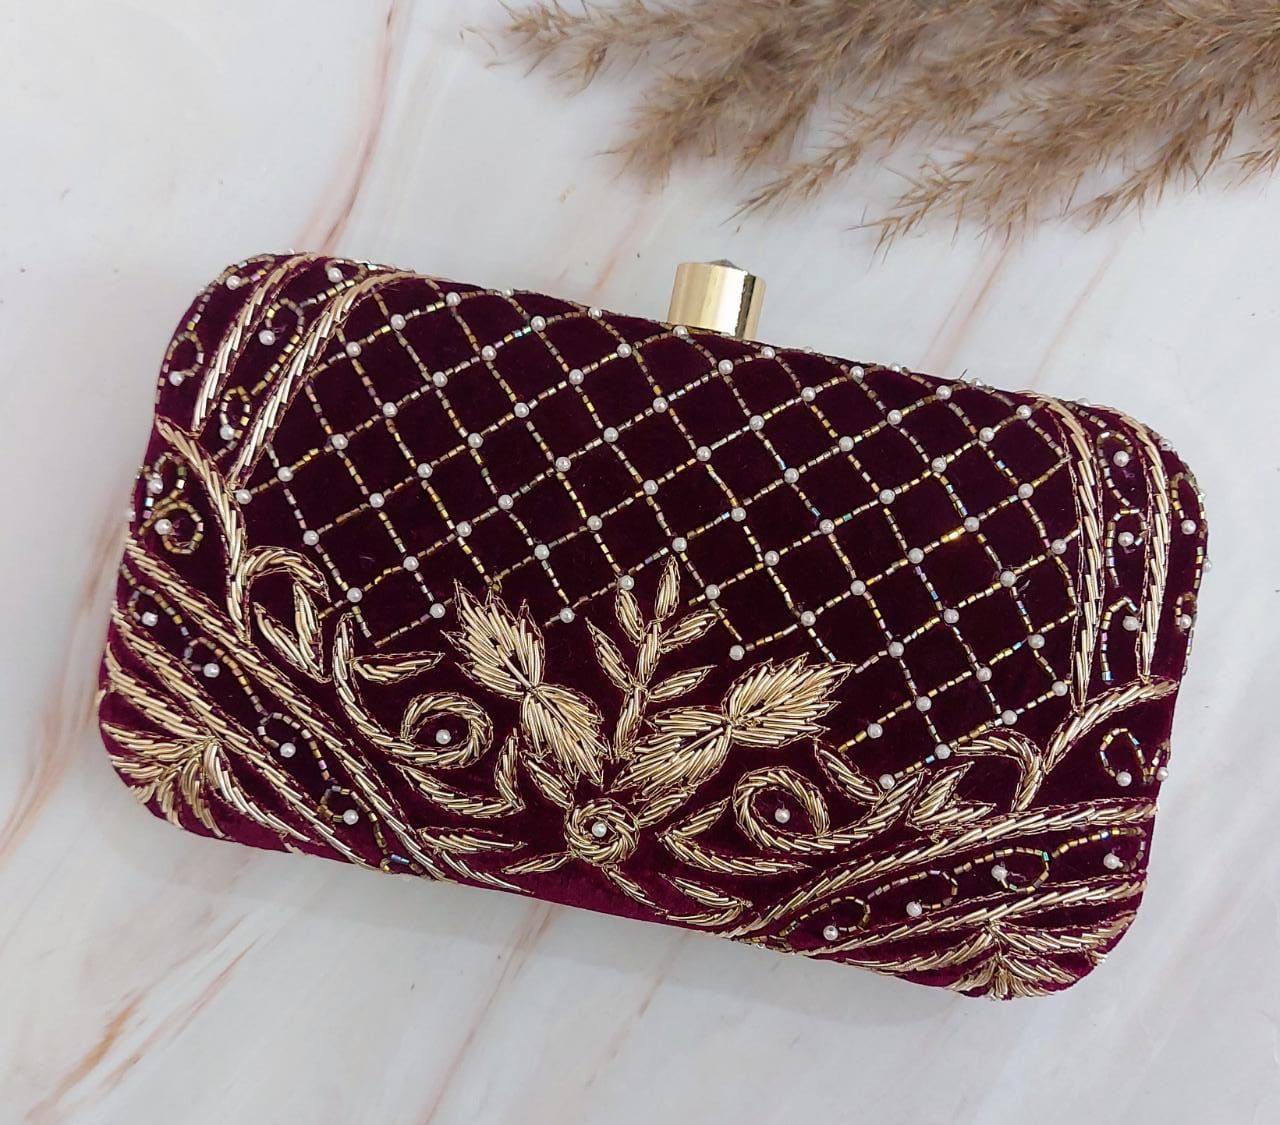 Clutch Purse with embroidery - W4172 - W4172 at Rs 85.50 | Gifts for all  occasions by Wedtree